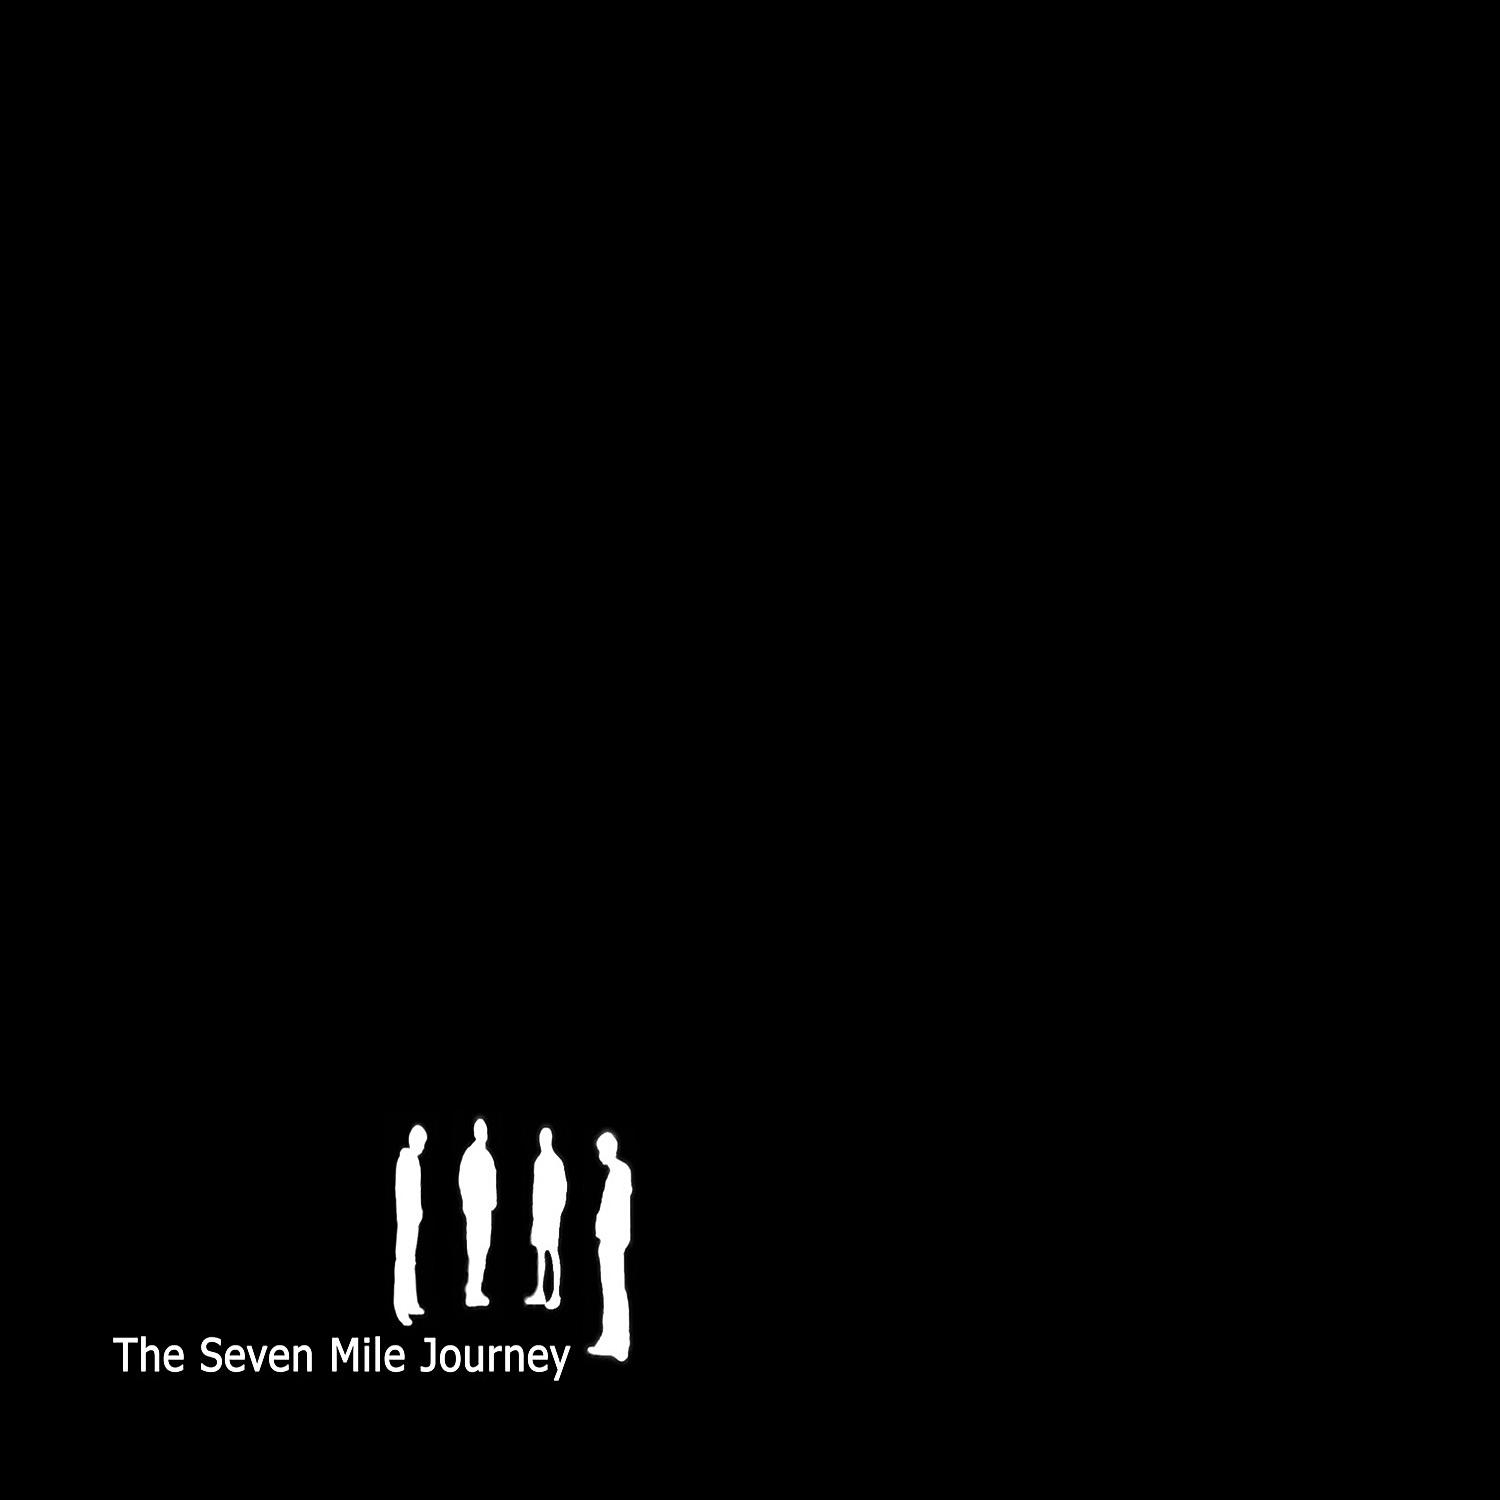 Mile journey. Journey discography.